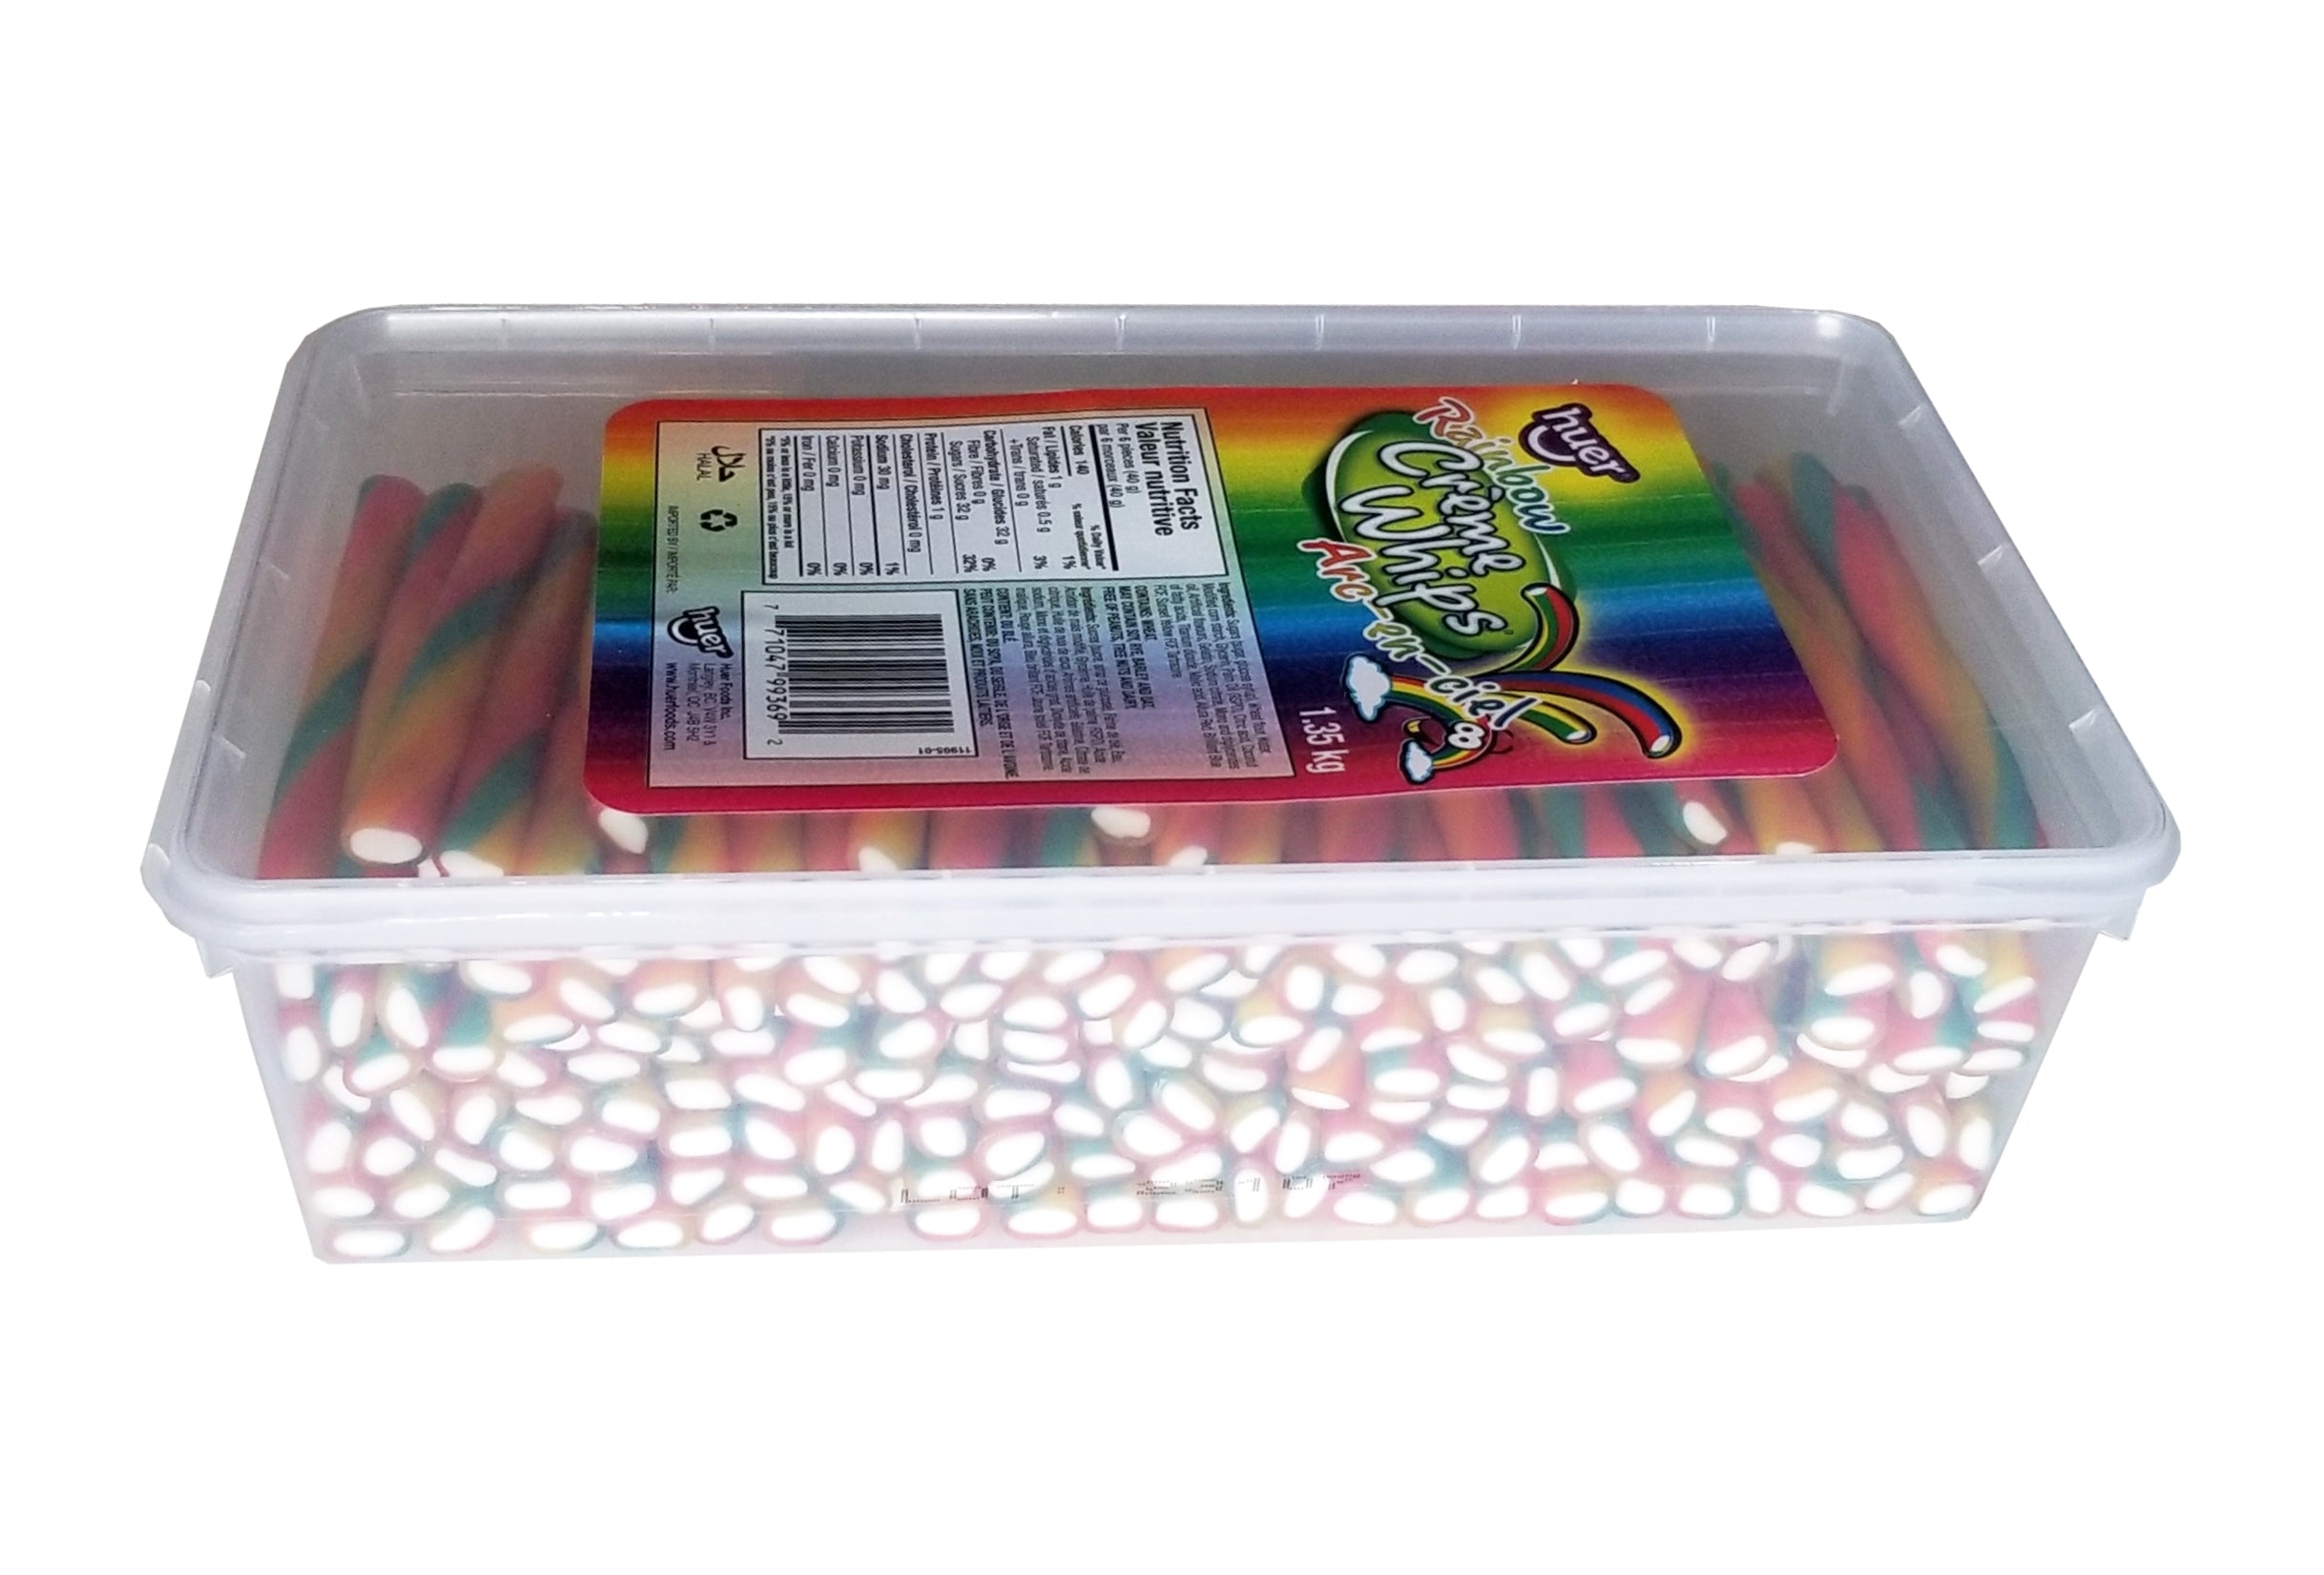 Huer Rainbow Creme Whips Ropes Candy, 1.35kg/3 lbs. Box {Imported